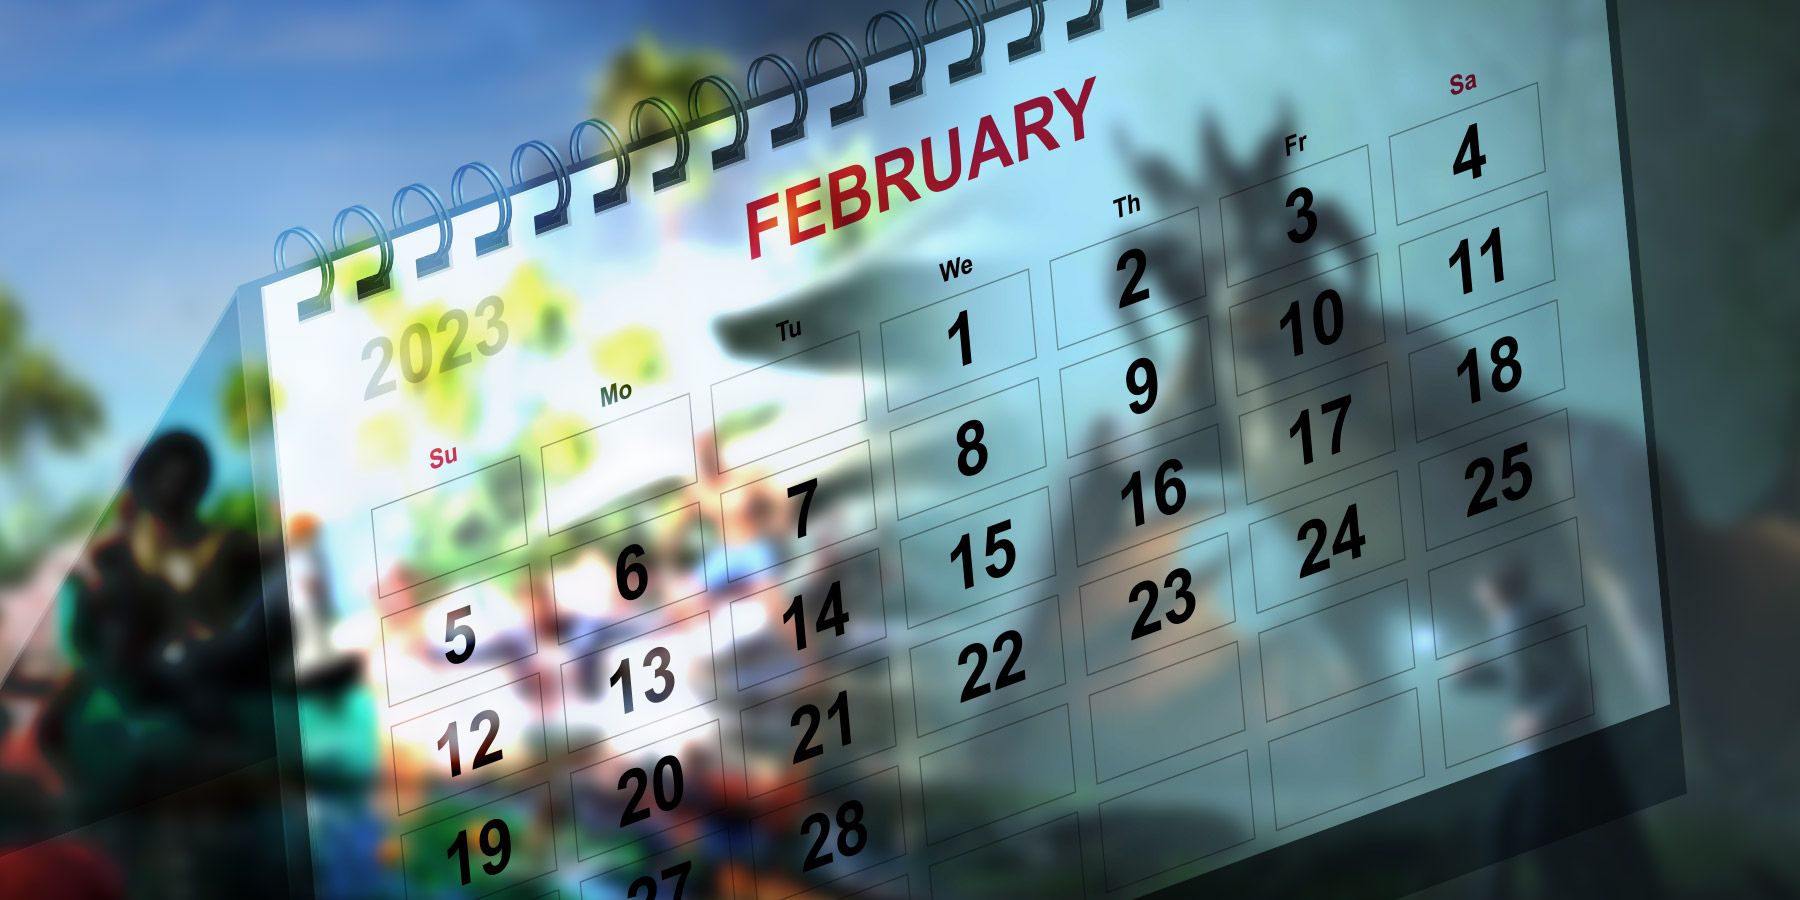 Thanks to some recent announcements, February 2023 is shaping up to be an absolutely stacked month for the gaming industry.